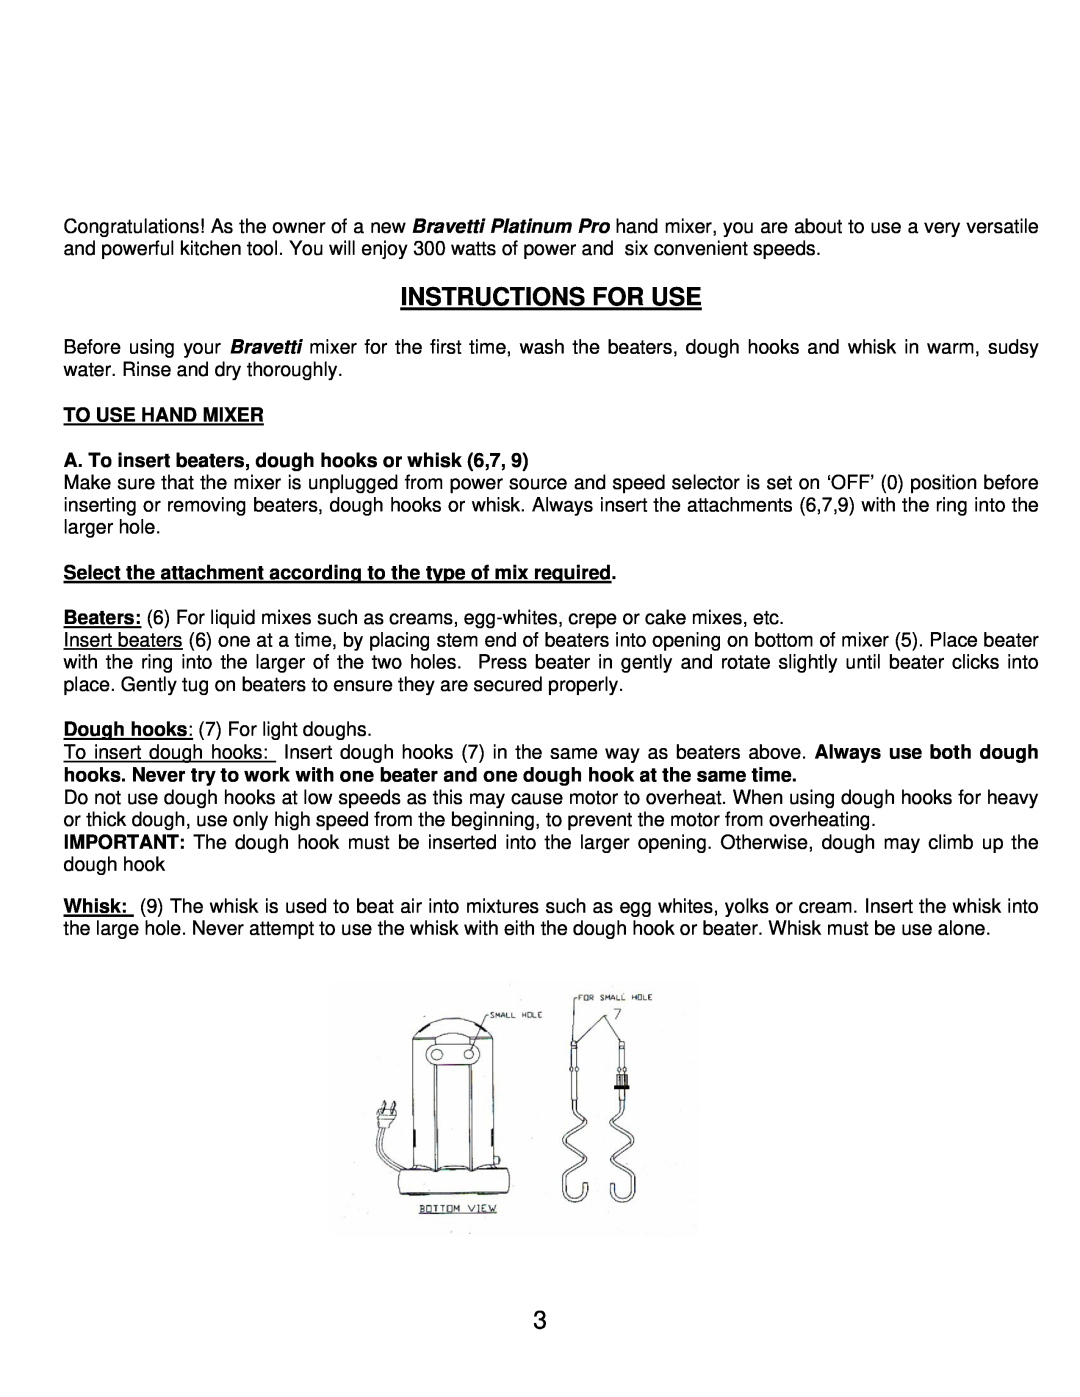 Bravetti FP201 manual Instructions For Use, To Use Hand Mixer, A. To insert beaters, dough hooks or whisk 6,7 